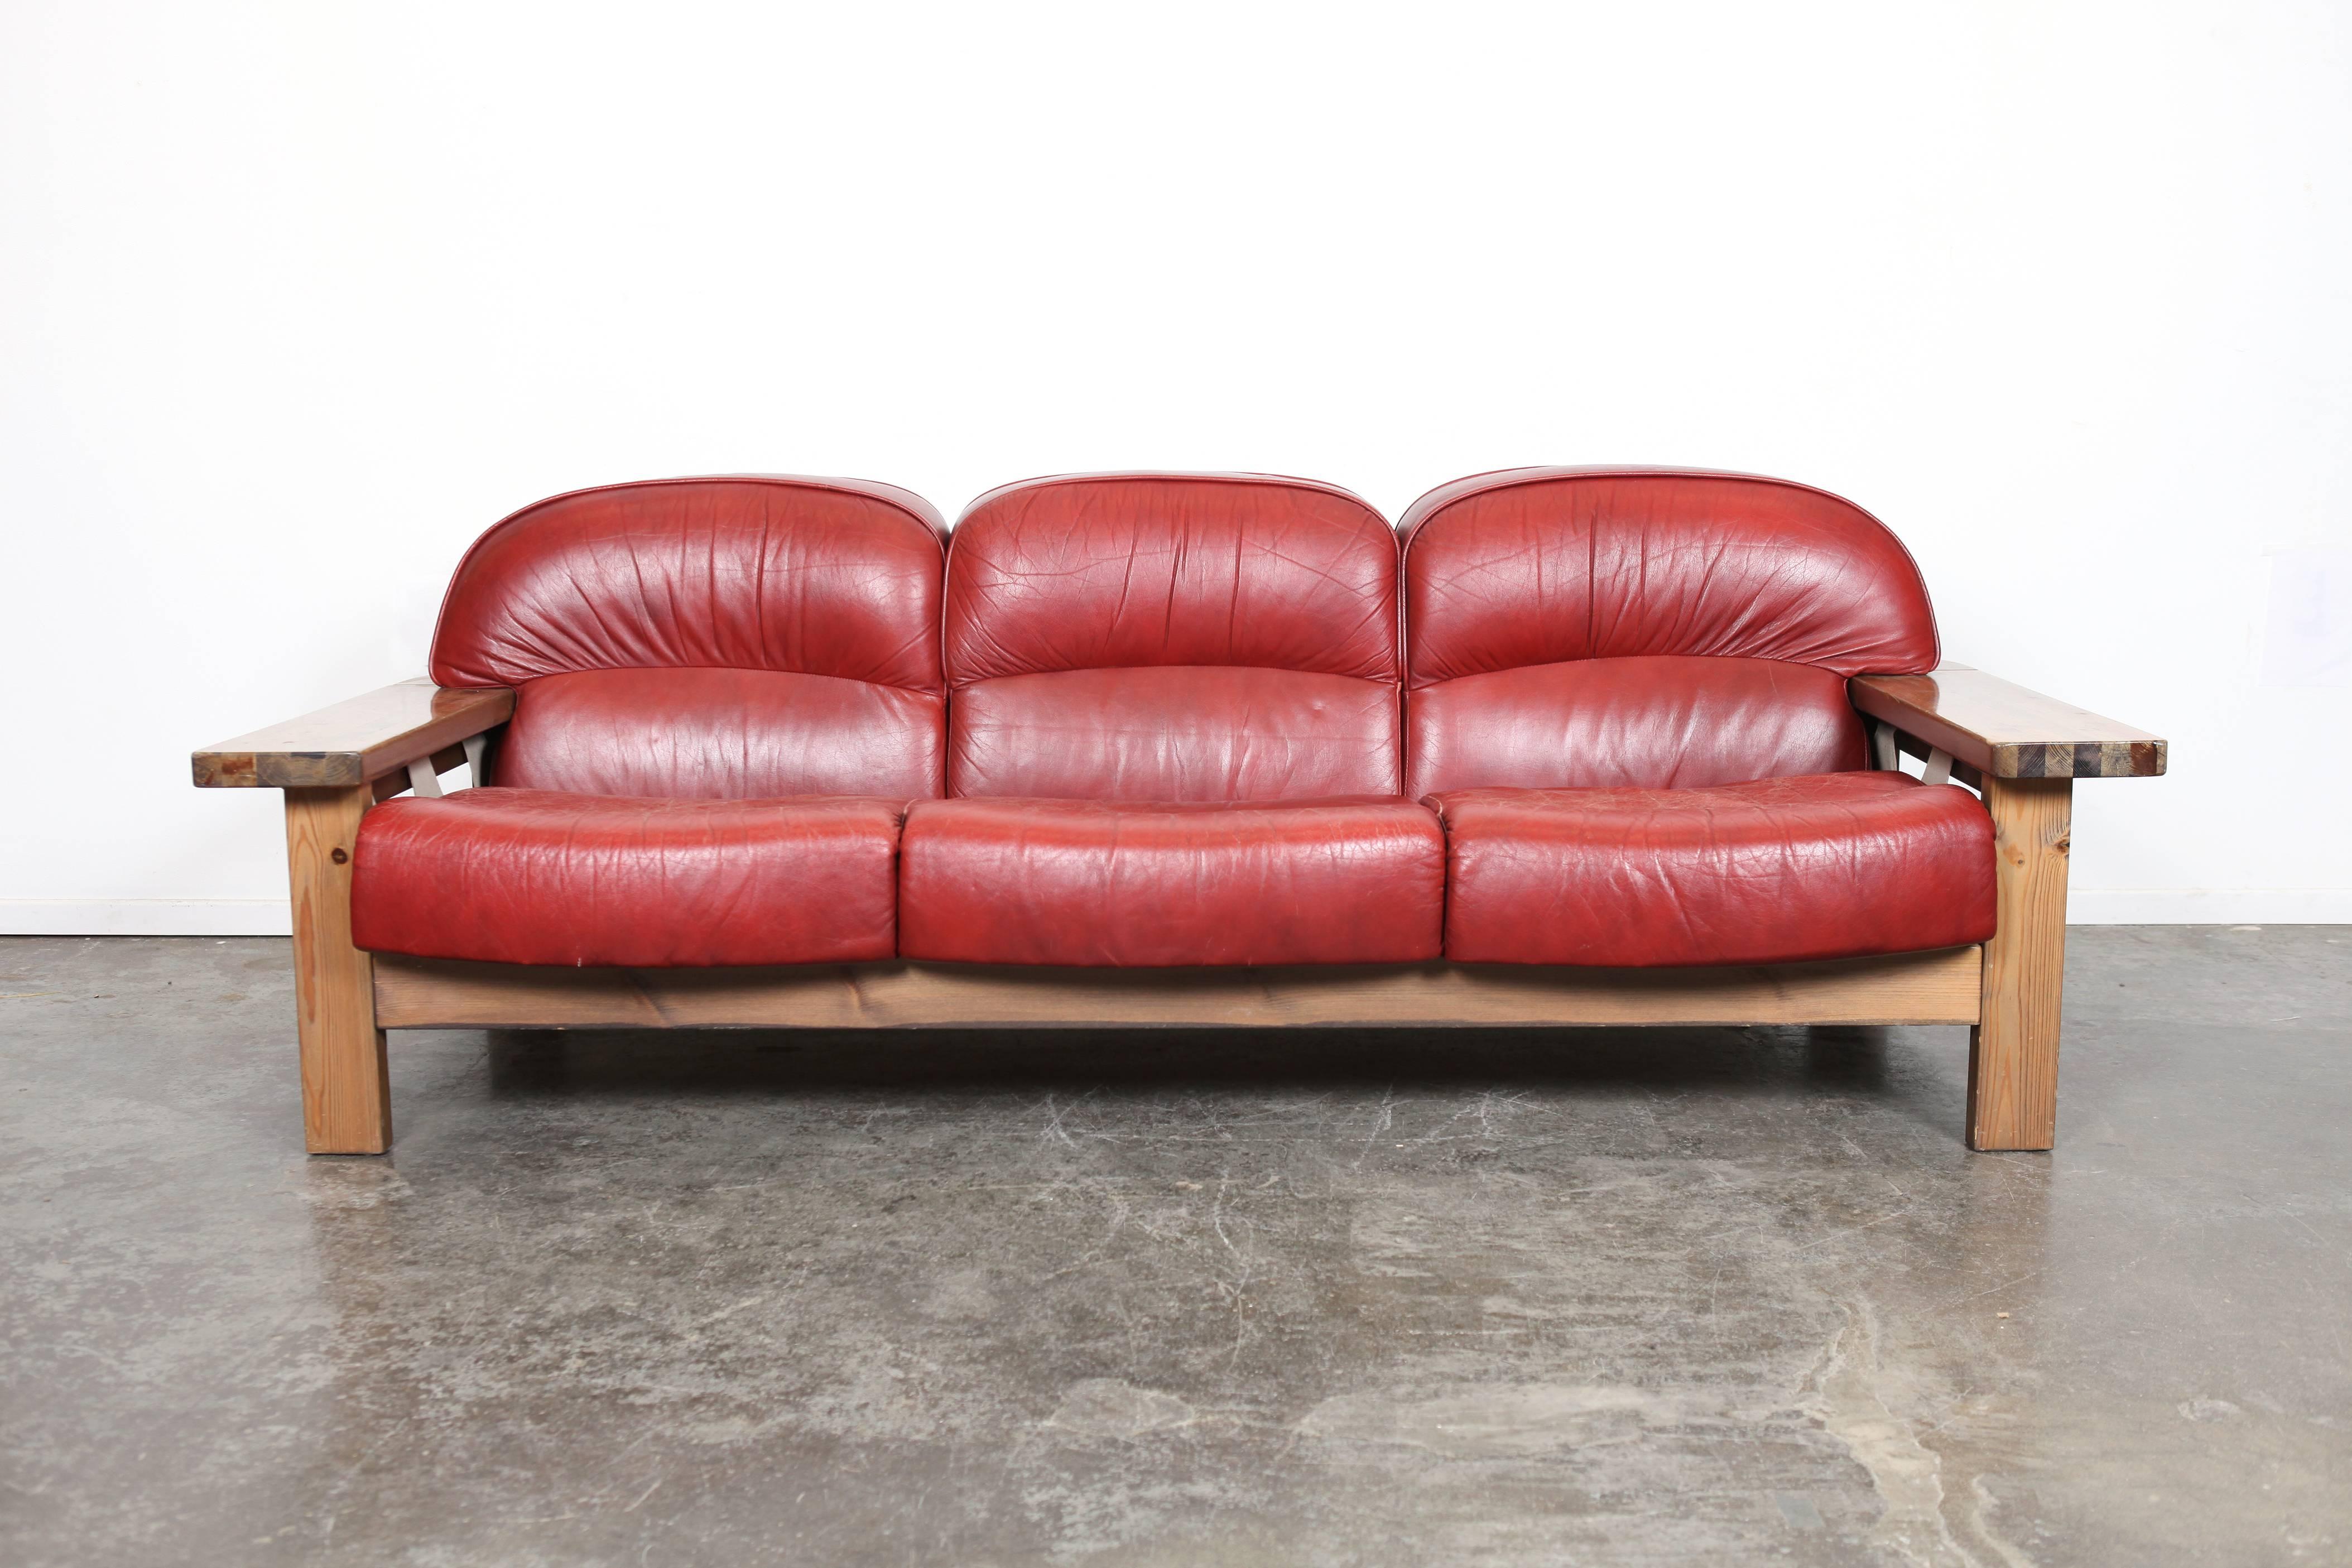 Mid-Century Modern very unique solid pine three-seat sofa with original red curved leather cushions, designed by Hämeen Kalustaja, Finland, 1970's. Matching two-seat sofa available for purchase separately.